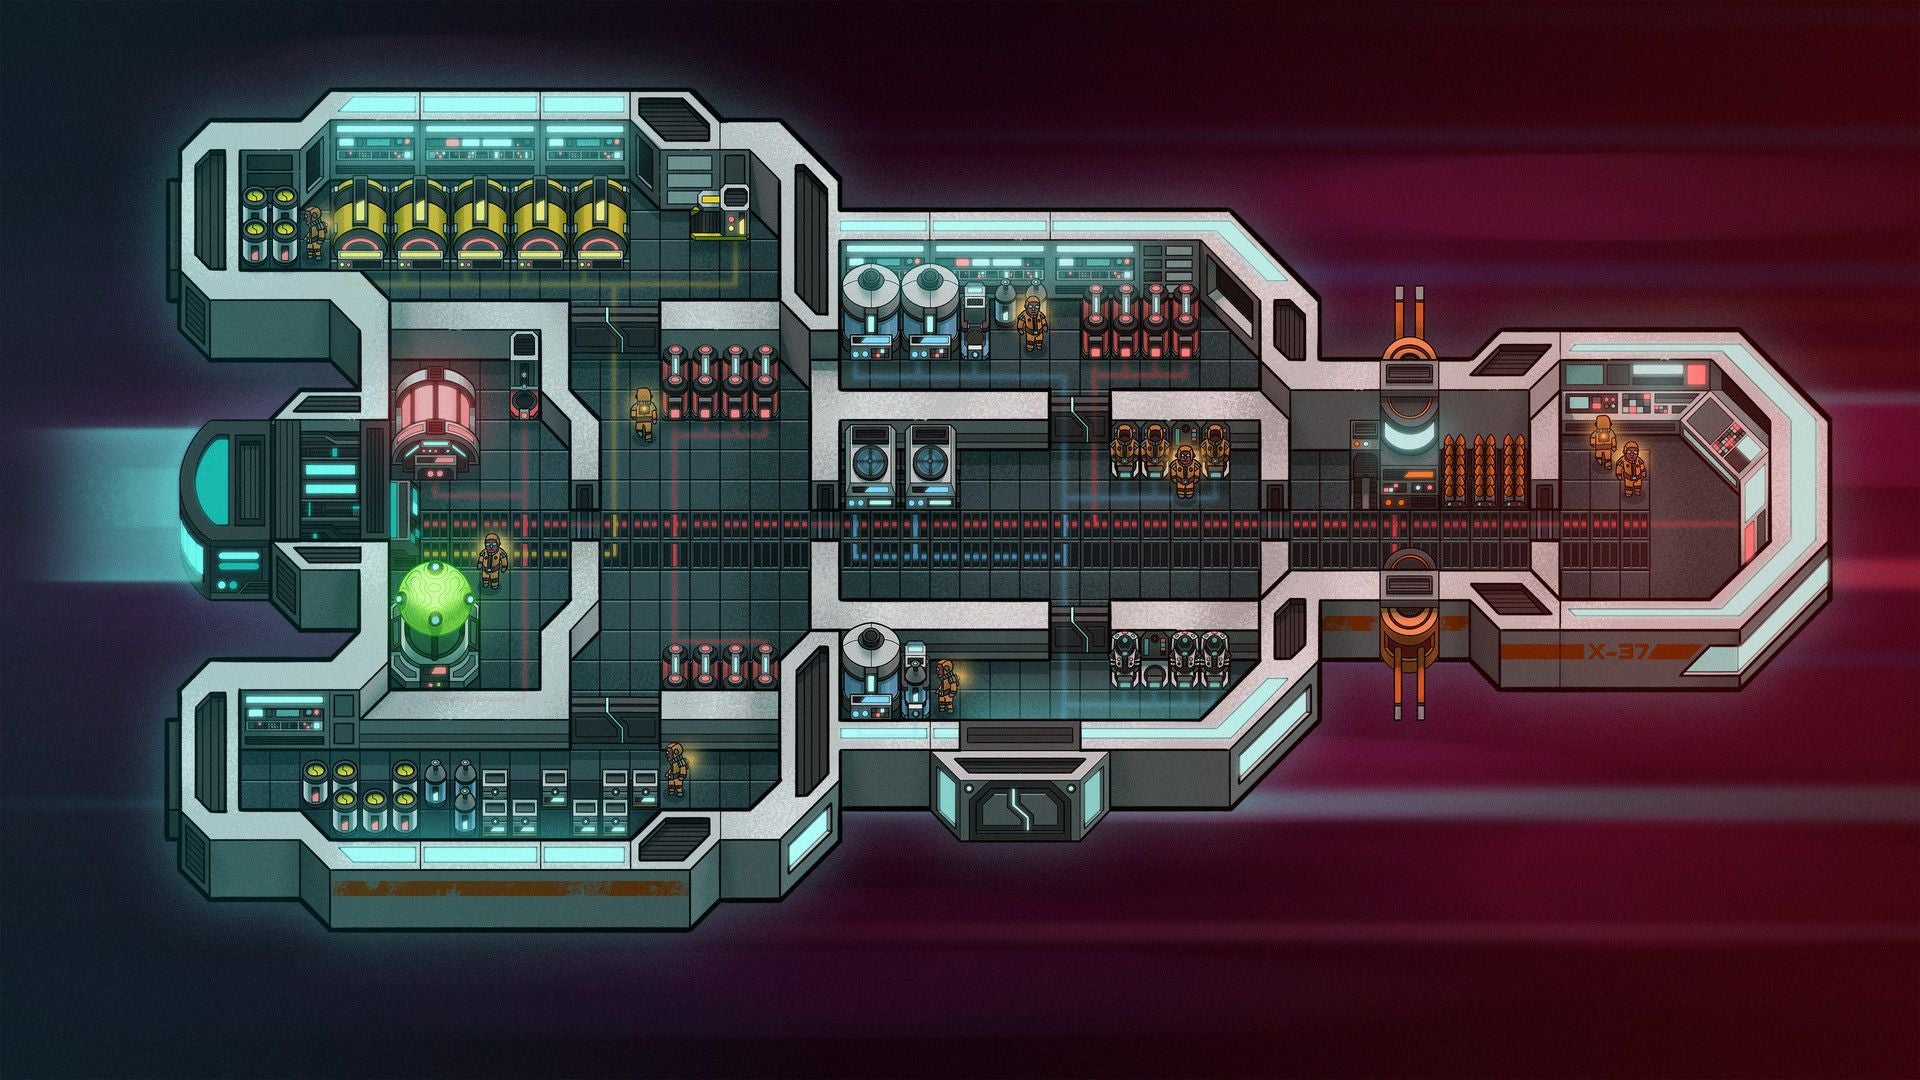 The Last Starship is the next game from Prison Architect developers Introversion Software.